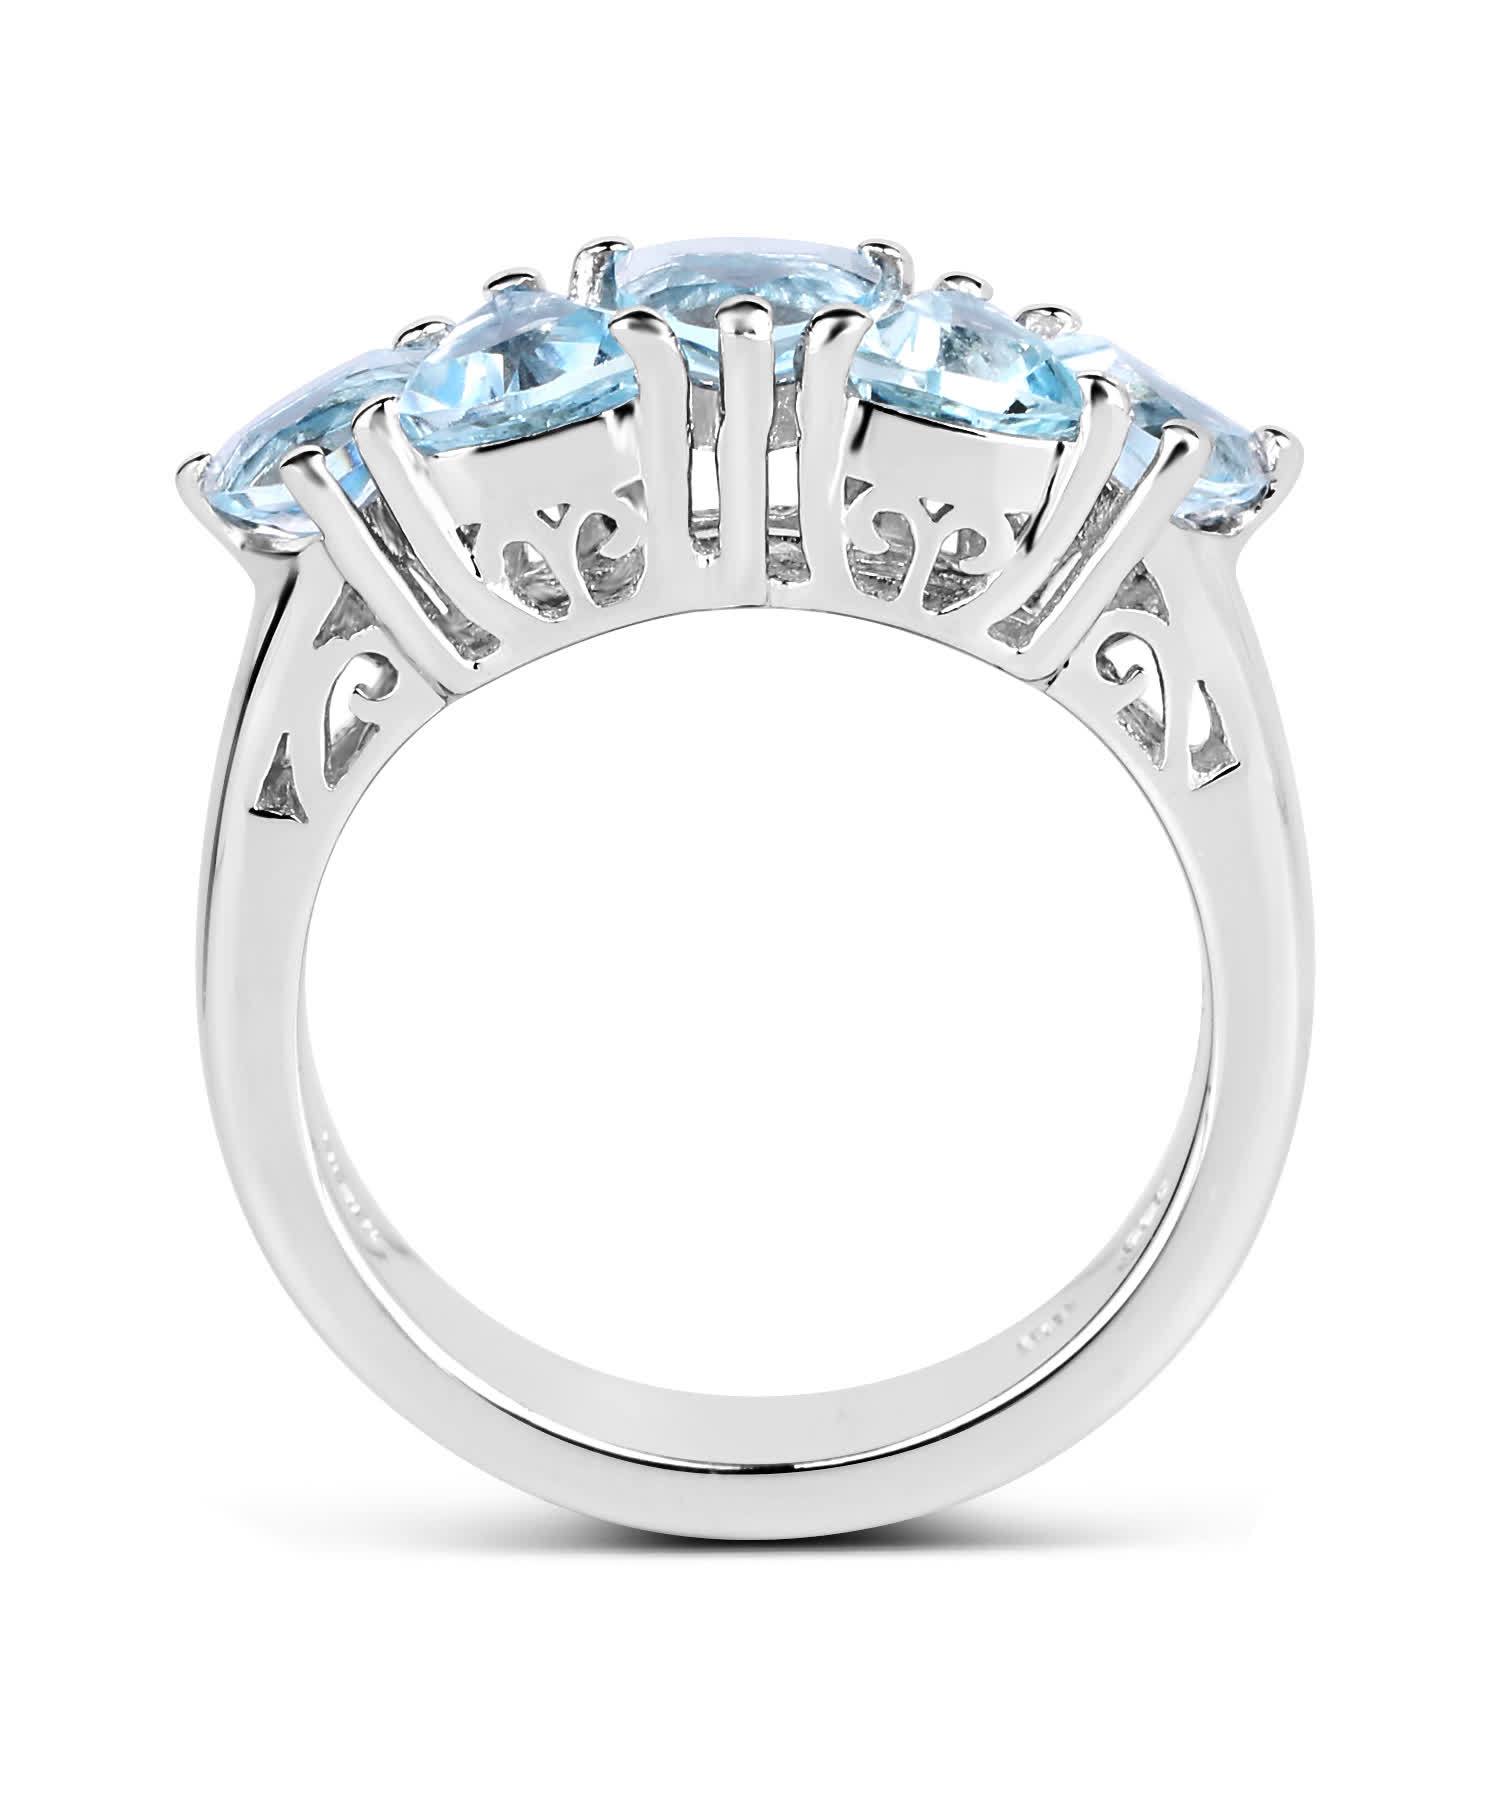 2.50ctw Natural Sky Blue Topaz Rhodium Plated 925 Sterling Silver Ring View 2